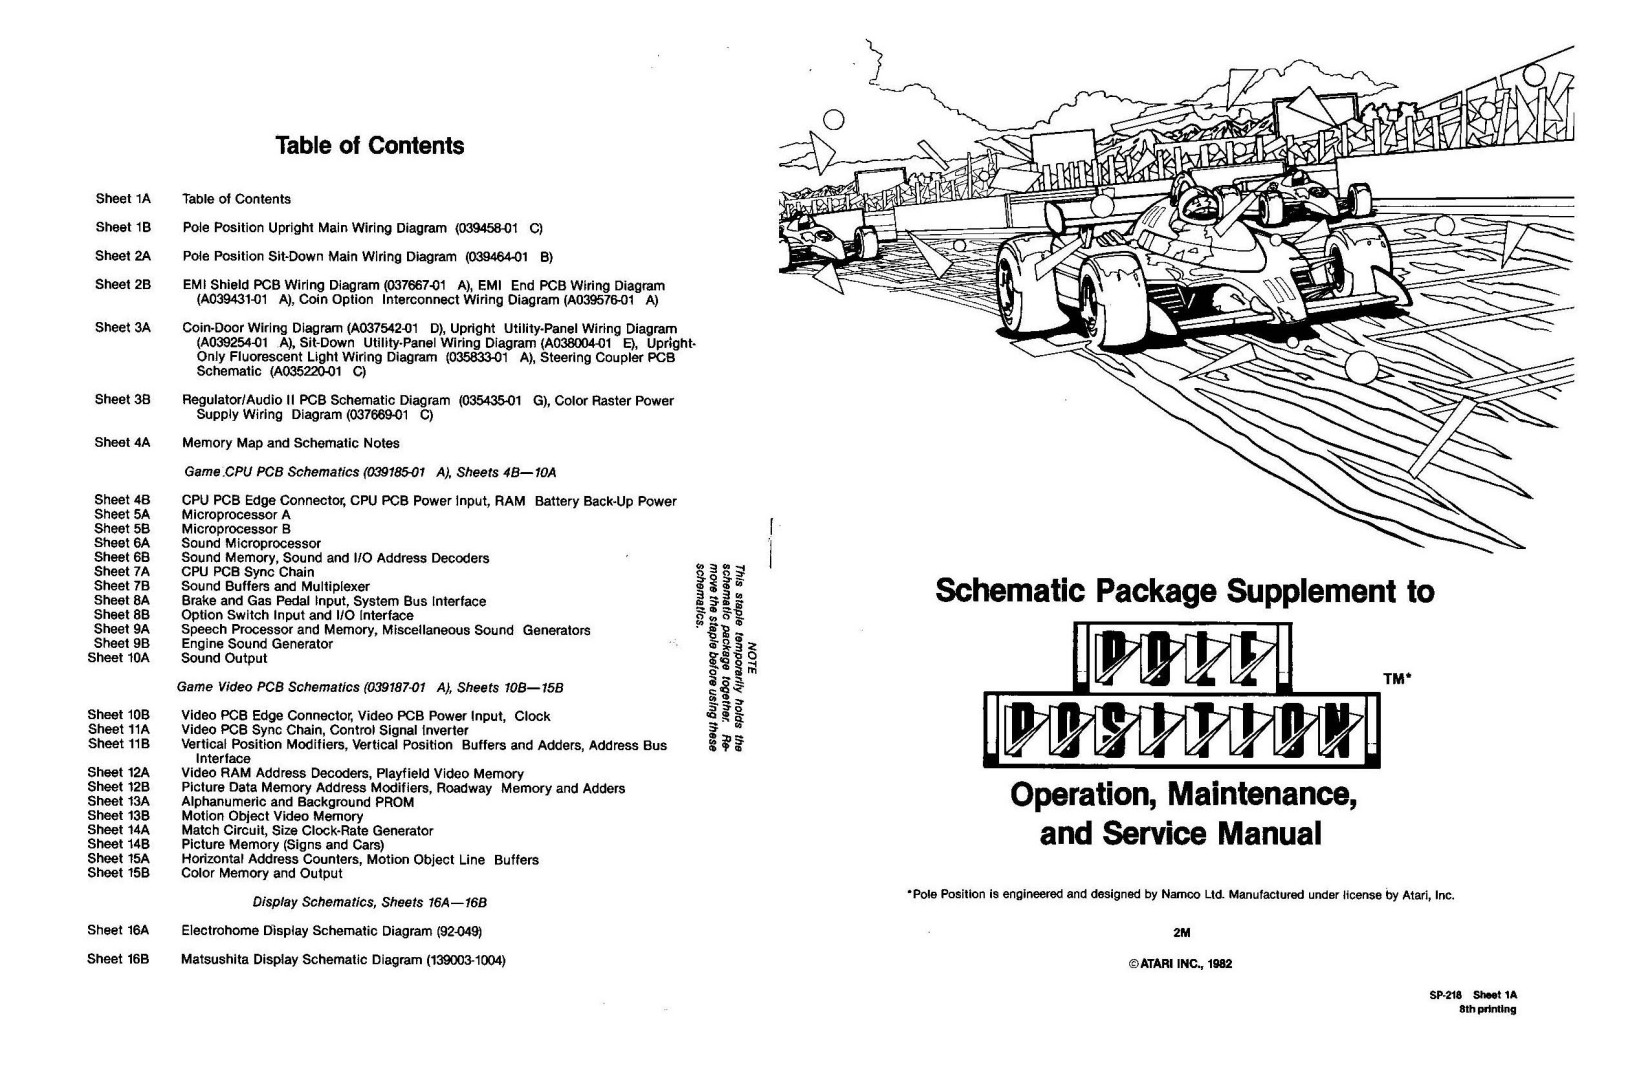 Pole Position (SP-218 8th Printing) (Schematic Package) (U)